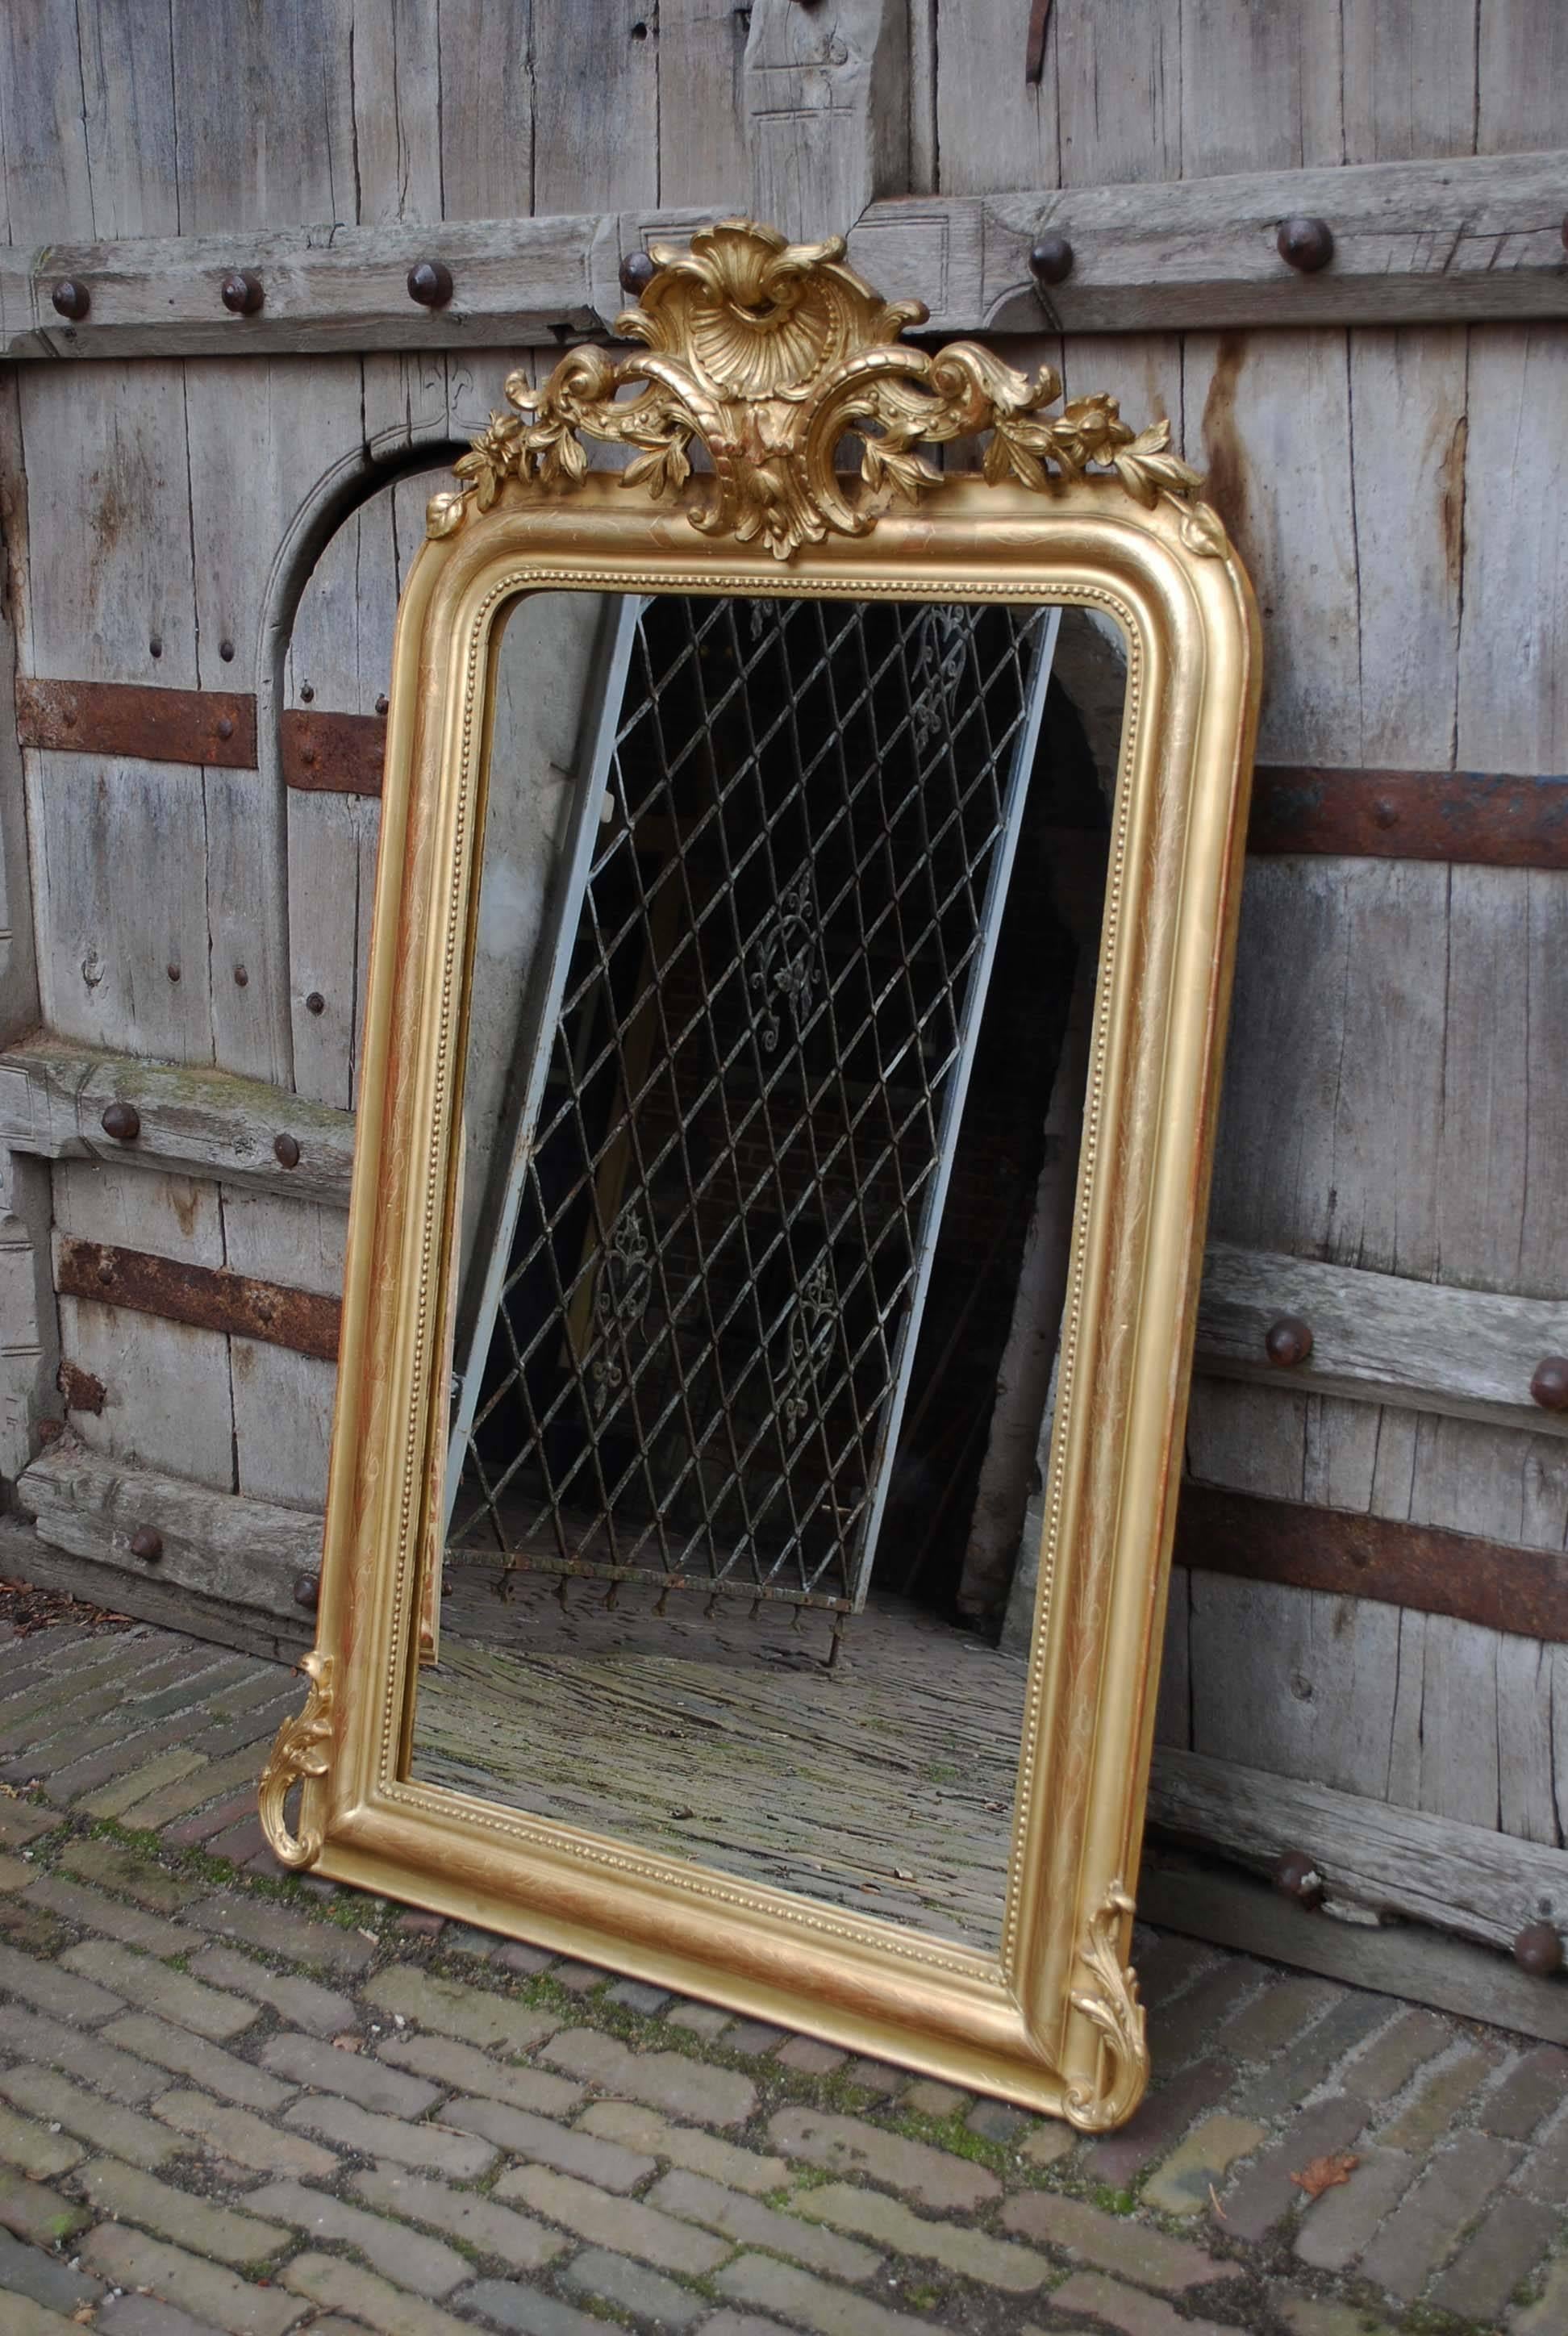 A Louis Philippe style gold leaf gilt frame with original mirror glass.
The mirror has an ornate crest with a central scallop shell surrounded by classical and floral elements.
The elevated part of the frame has a floral engraving and this part